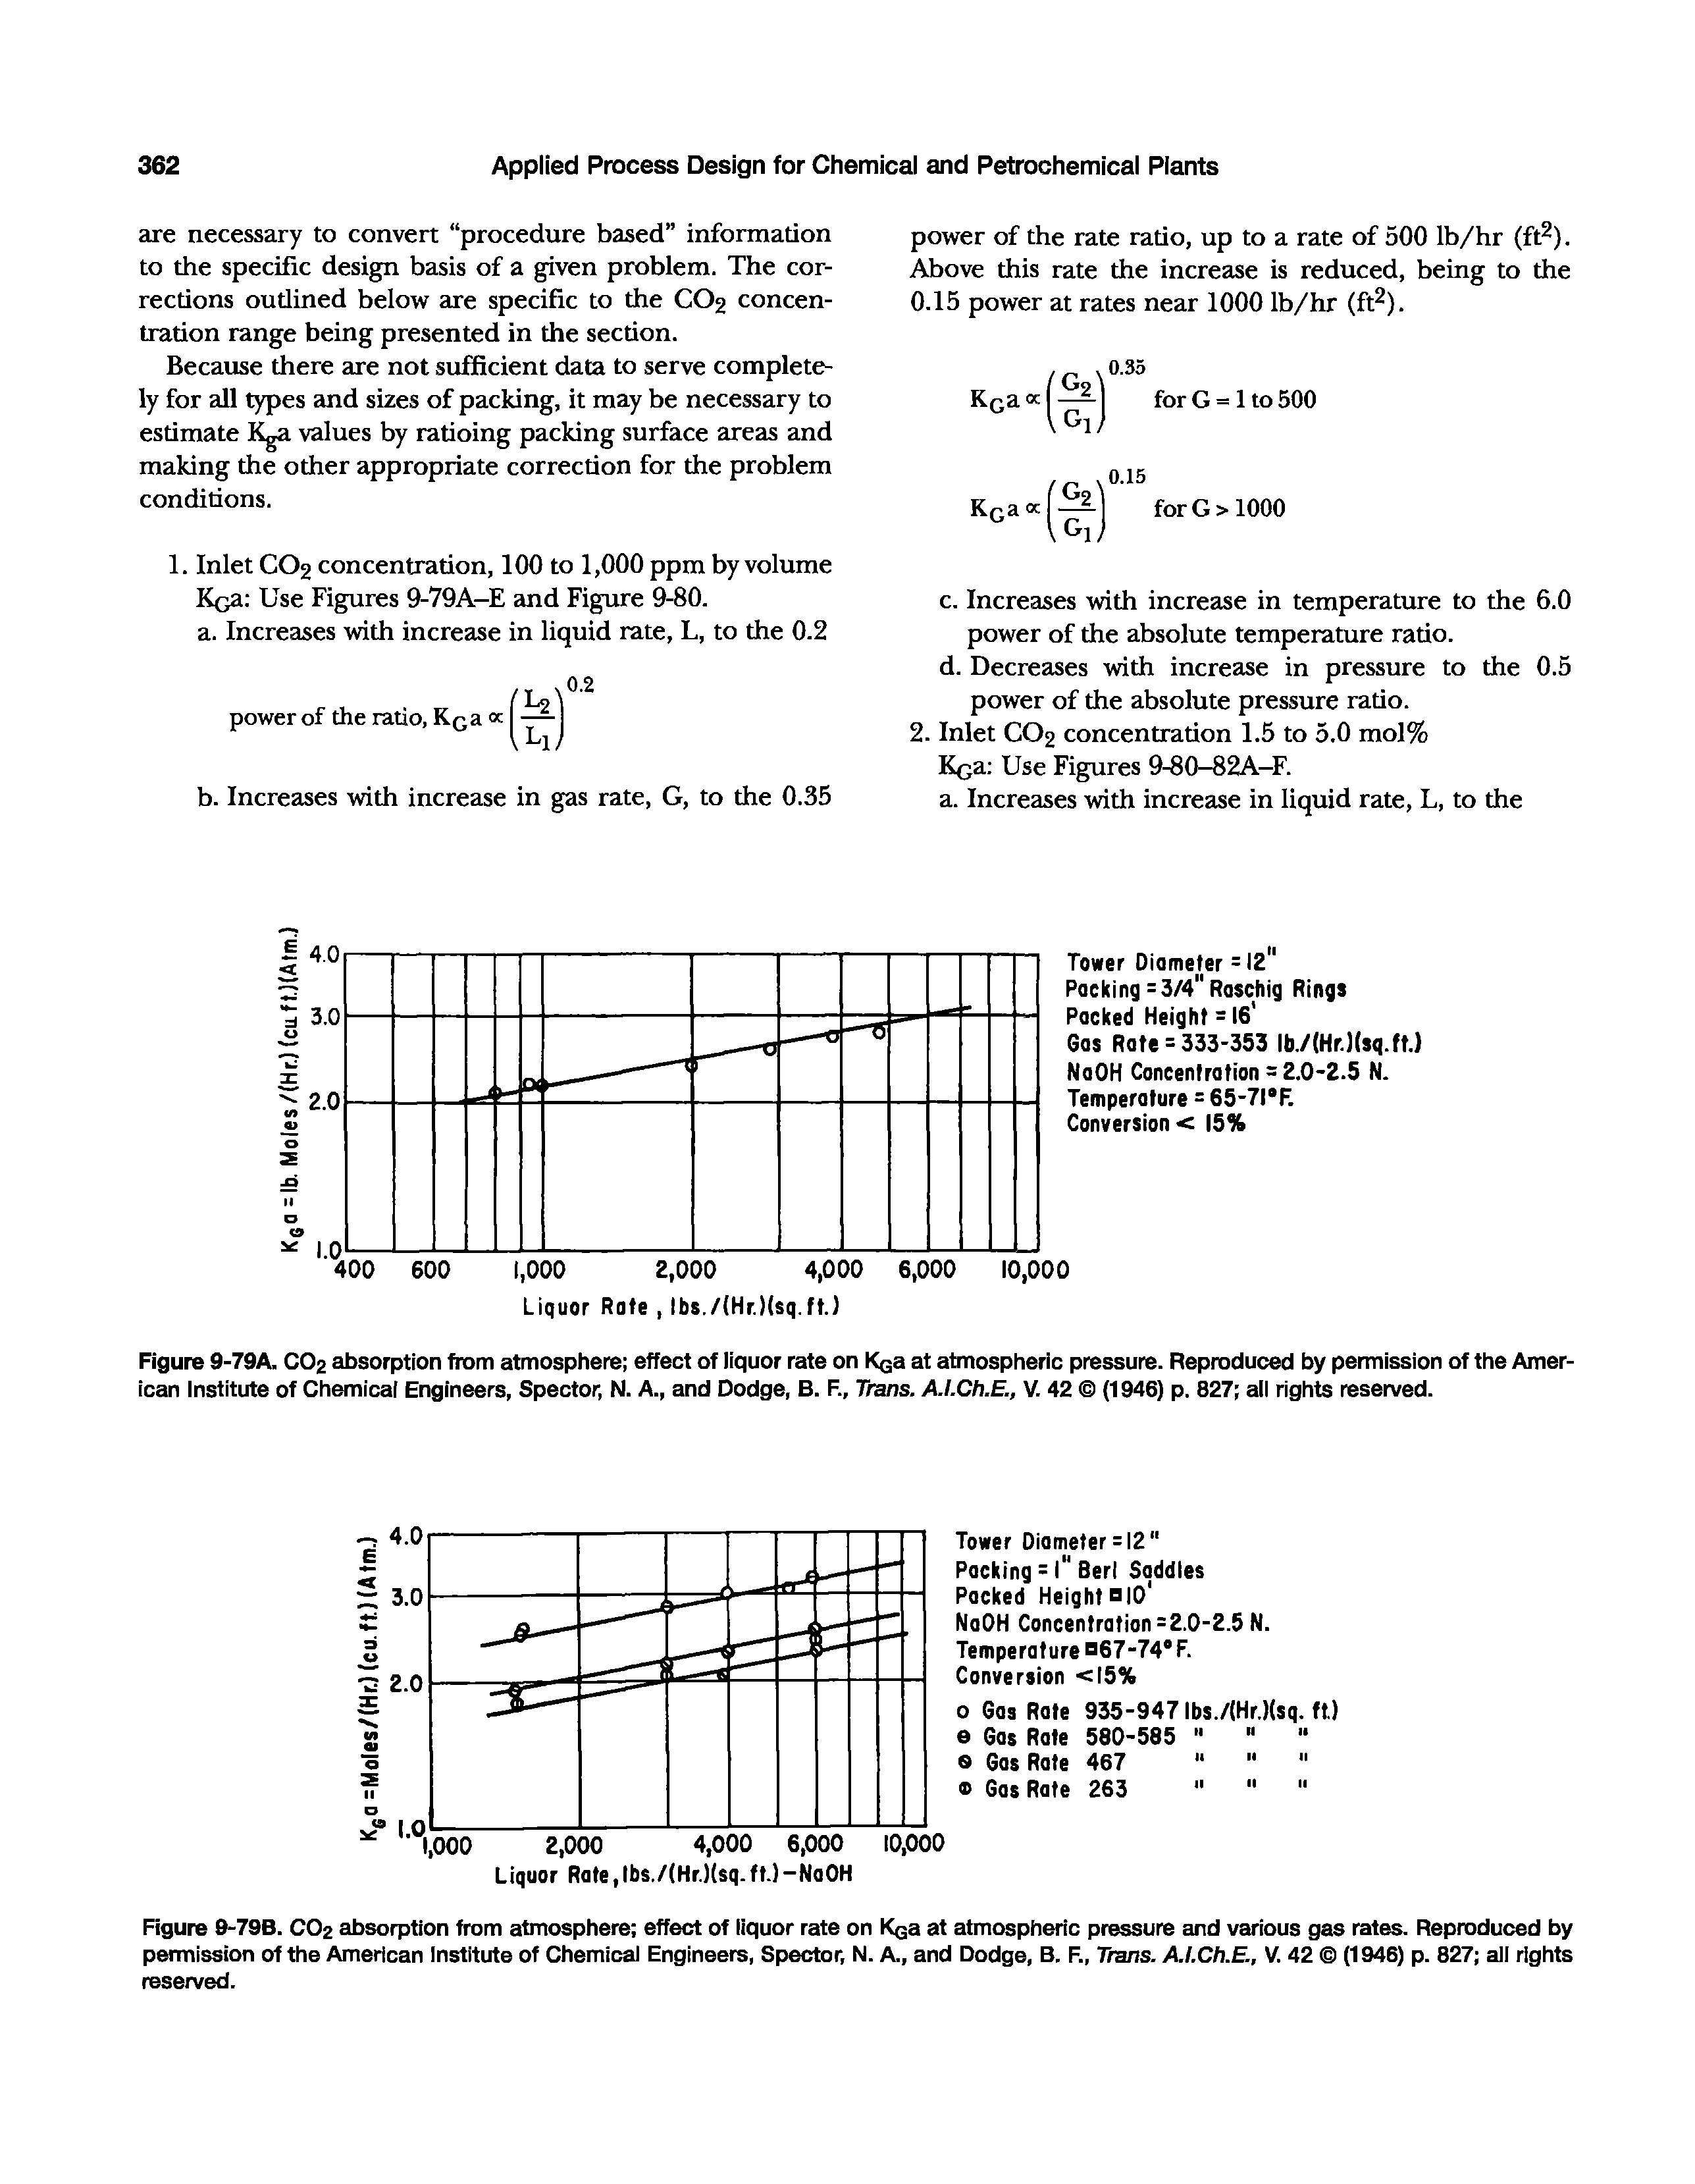 Figure 9-79A. COg absorption from atmosphere effect of liquor rate on Kqs at atmospheric pressure. Reproduced by permission of the American Institute of Chemical Engineers, Spector, N. A., and Dodge, B. F., Trans. A.I.Ch.E., V. 42 (1946) p. 827 all rights reserved.